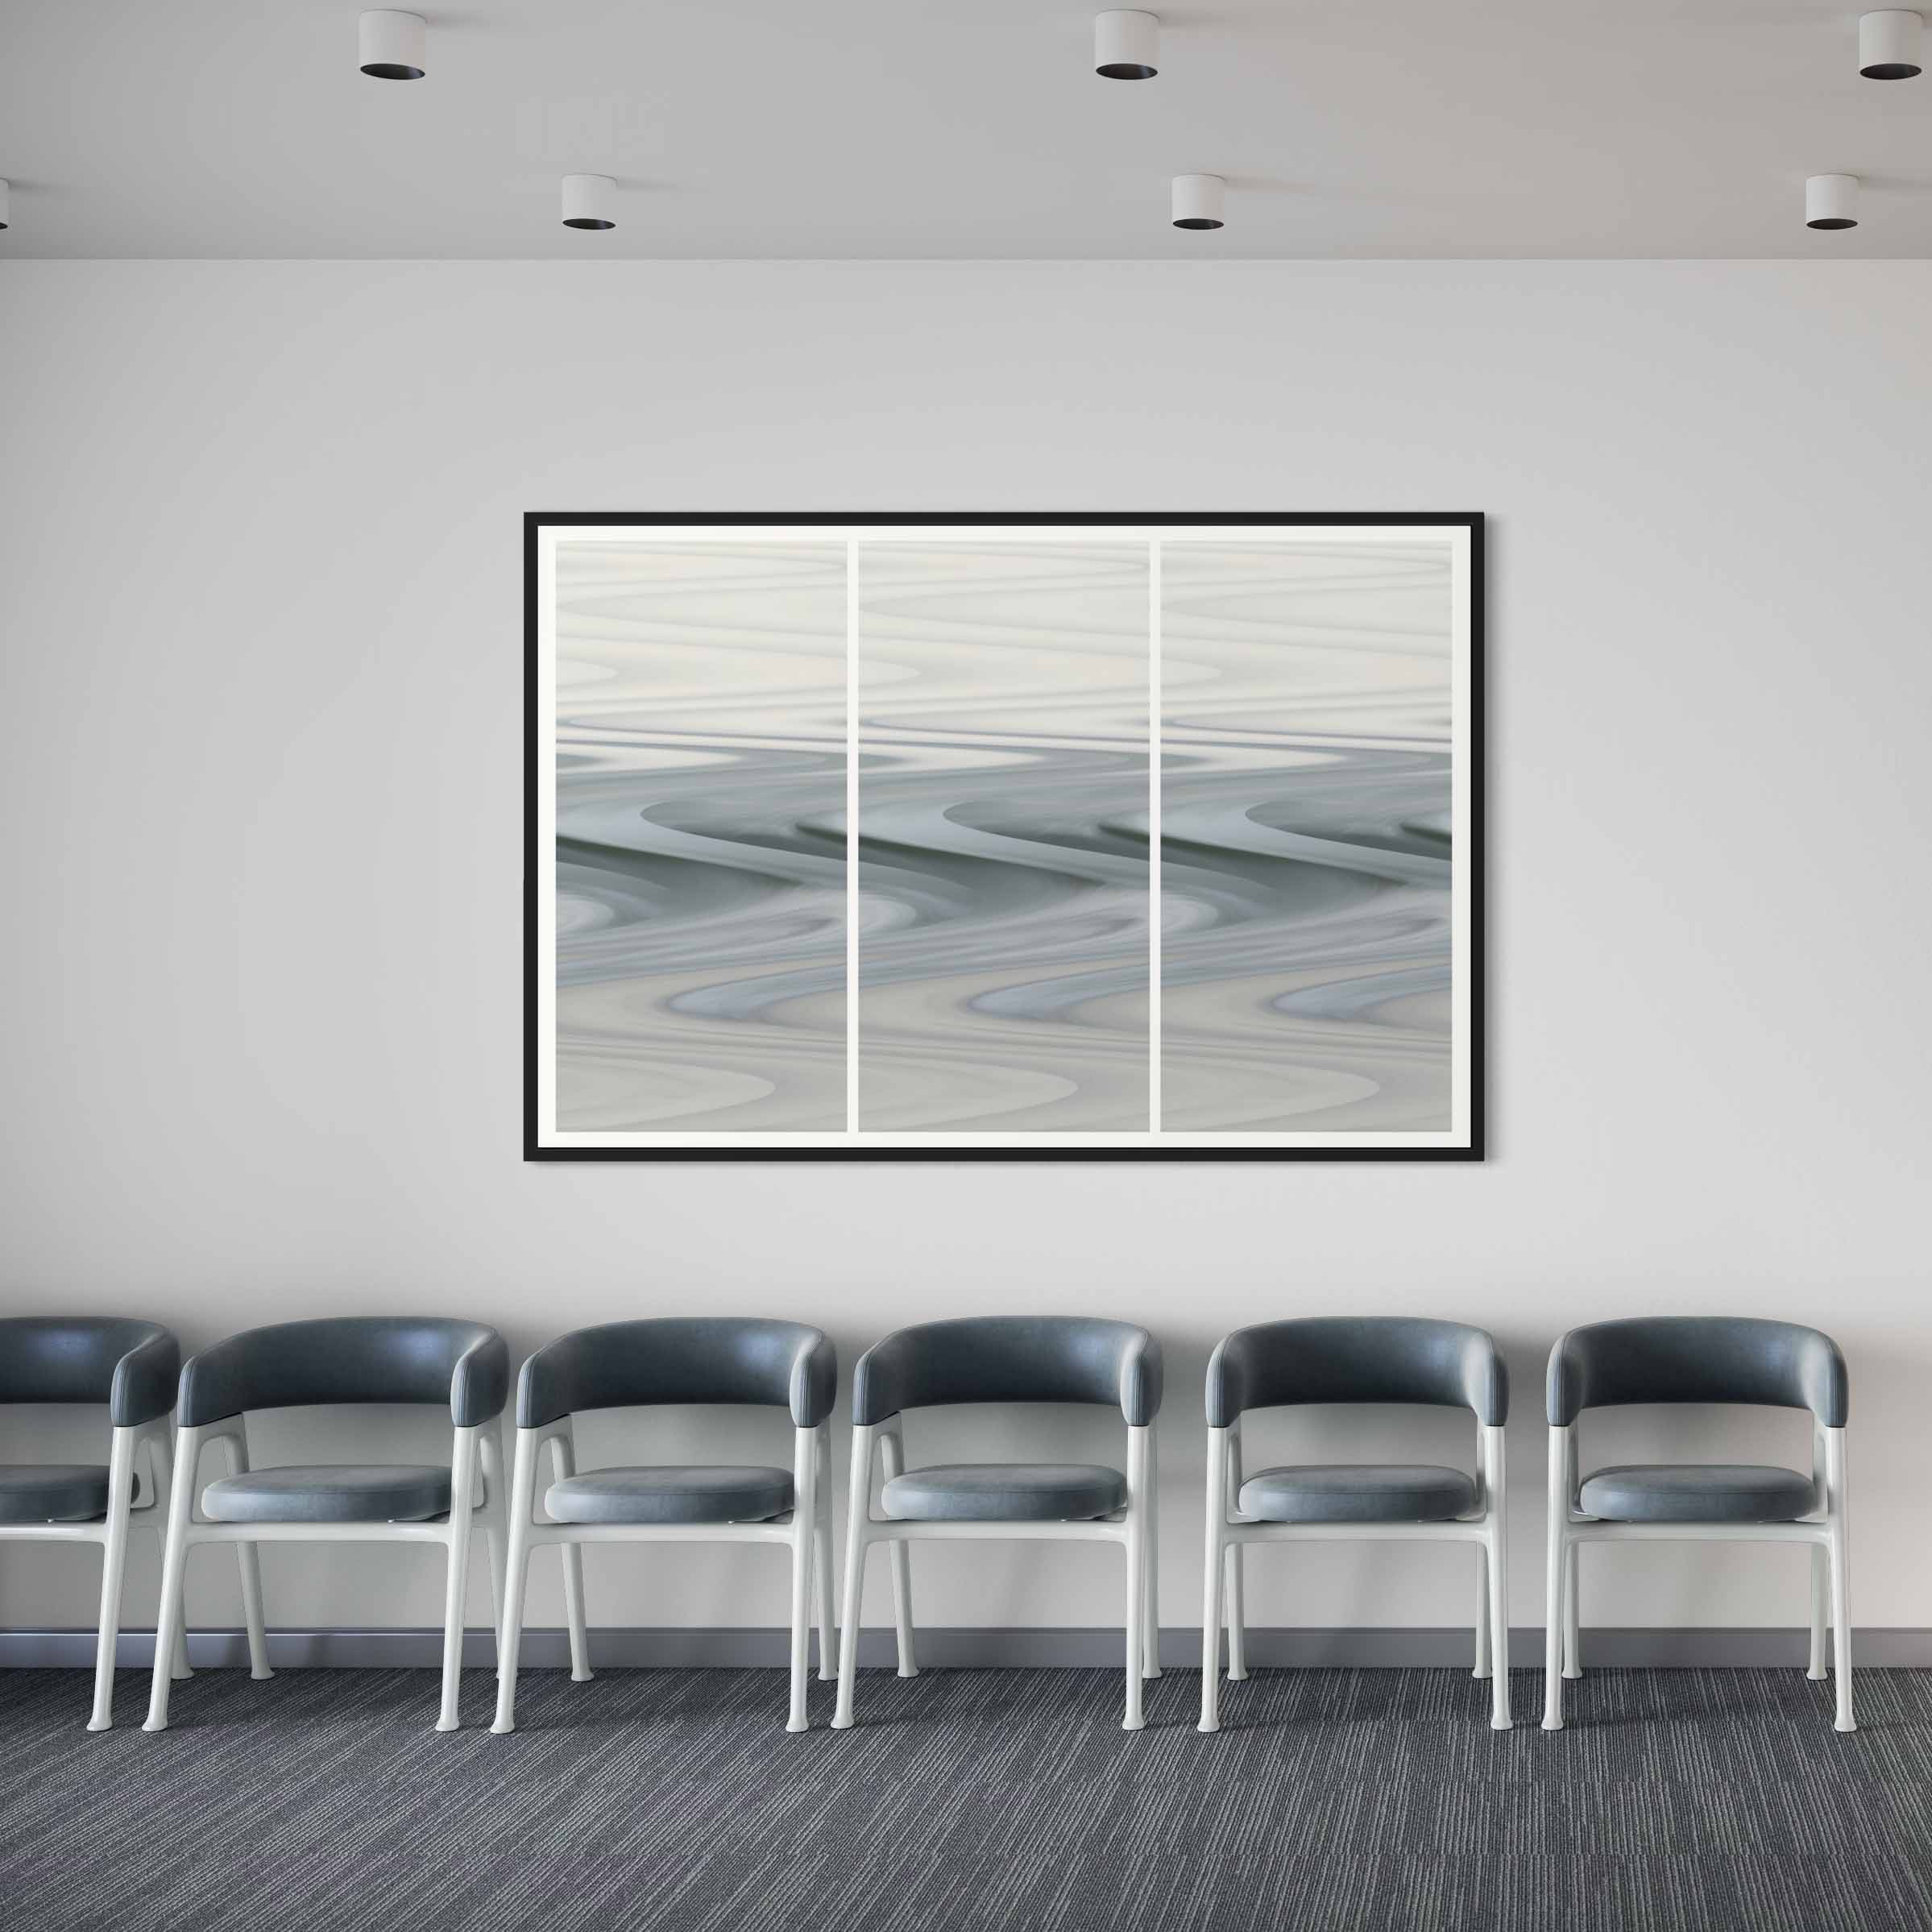 A row of chairs in front of a wall with a picture hanging on it.